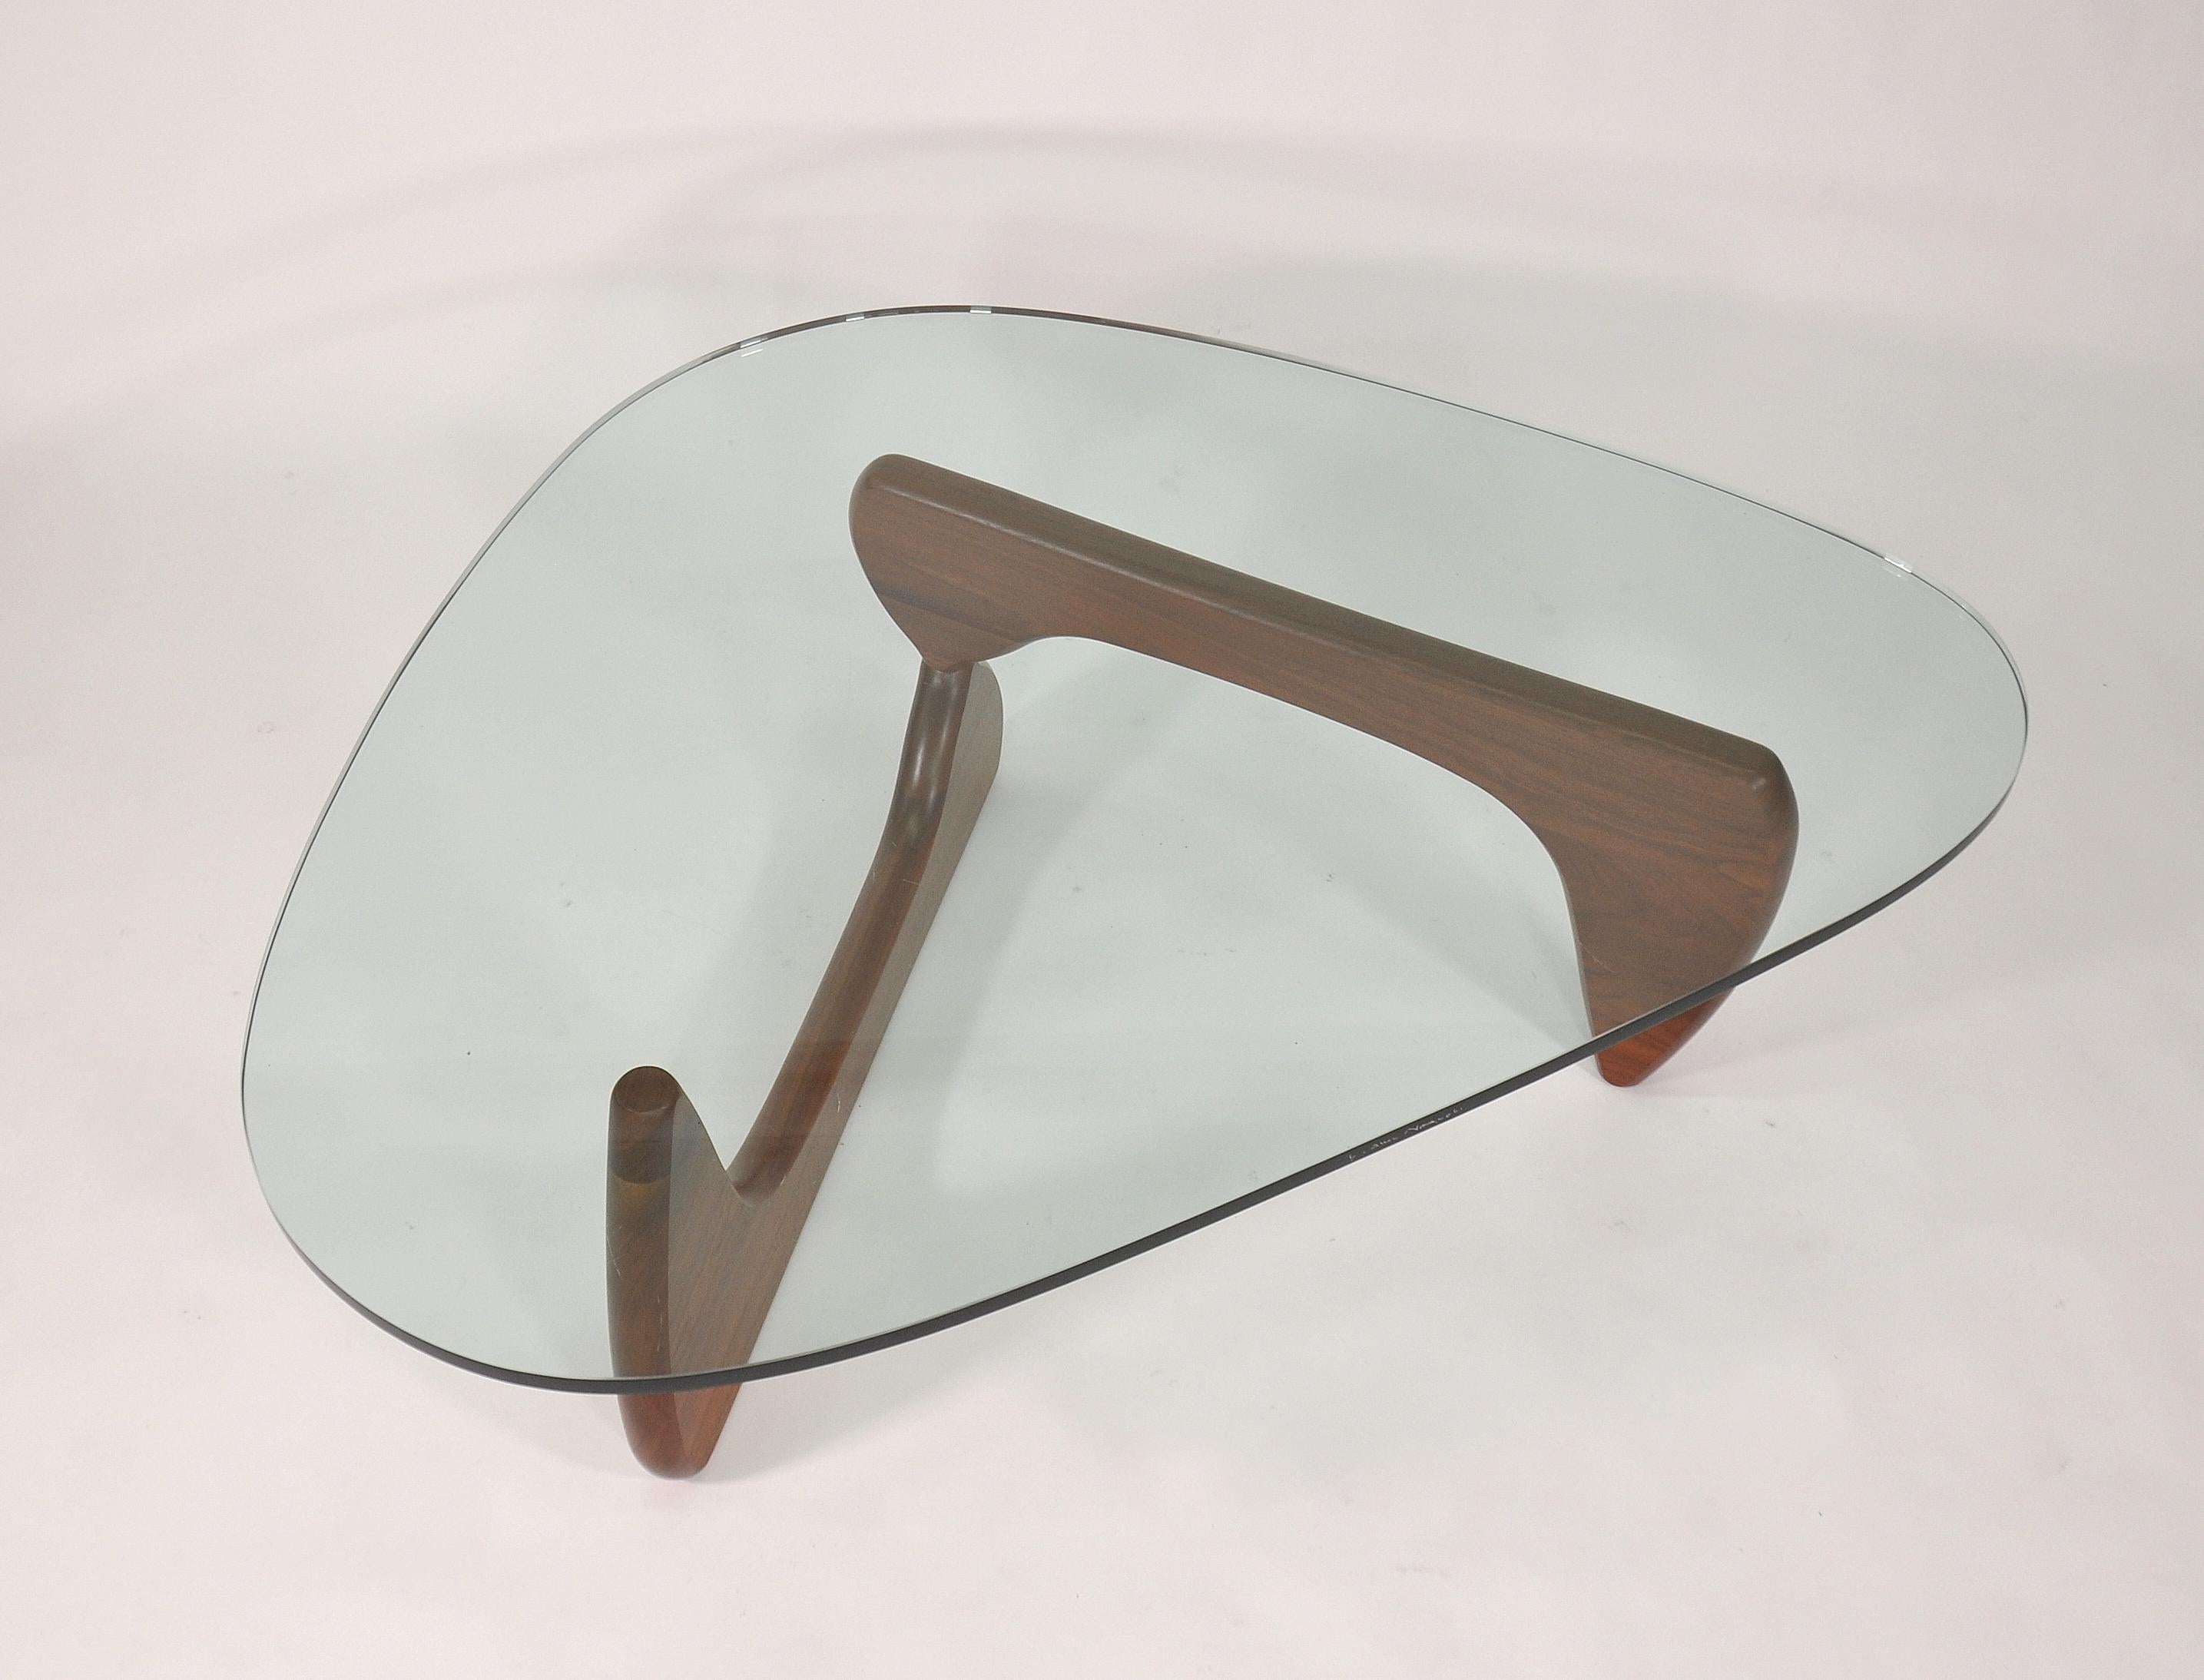 A vintage example of the iconic Mid-Century Modern IN-50 walnut and glass cocktail table designed by Isamu Noguchi in 1944, manufactured by Herman Miller. Integrates well with virtually any decor, from Danish or Scandinavian Modern interiors to